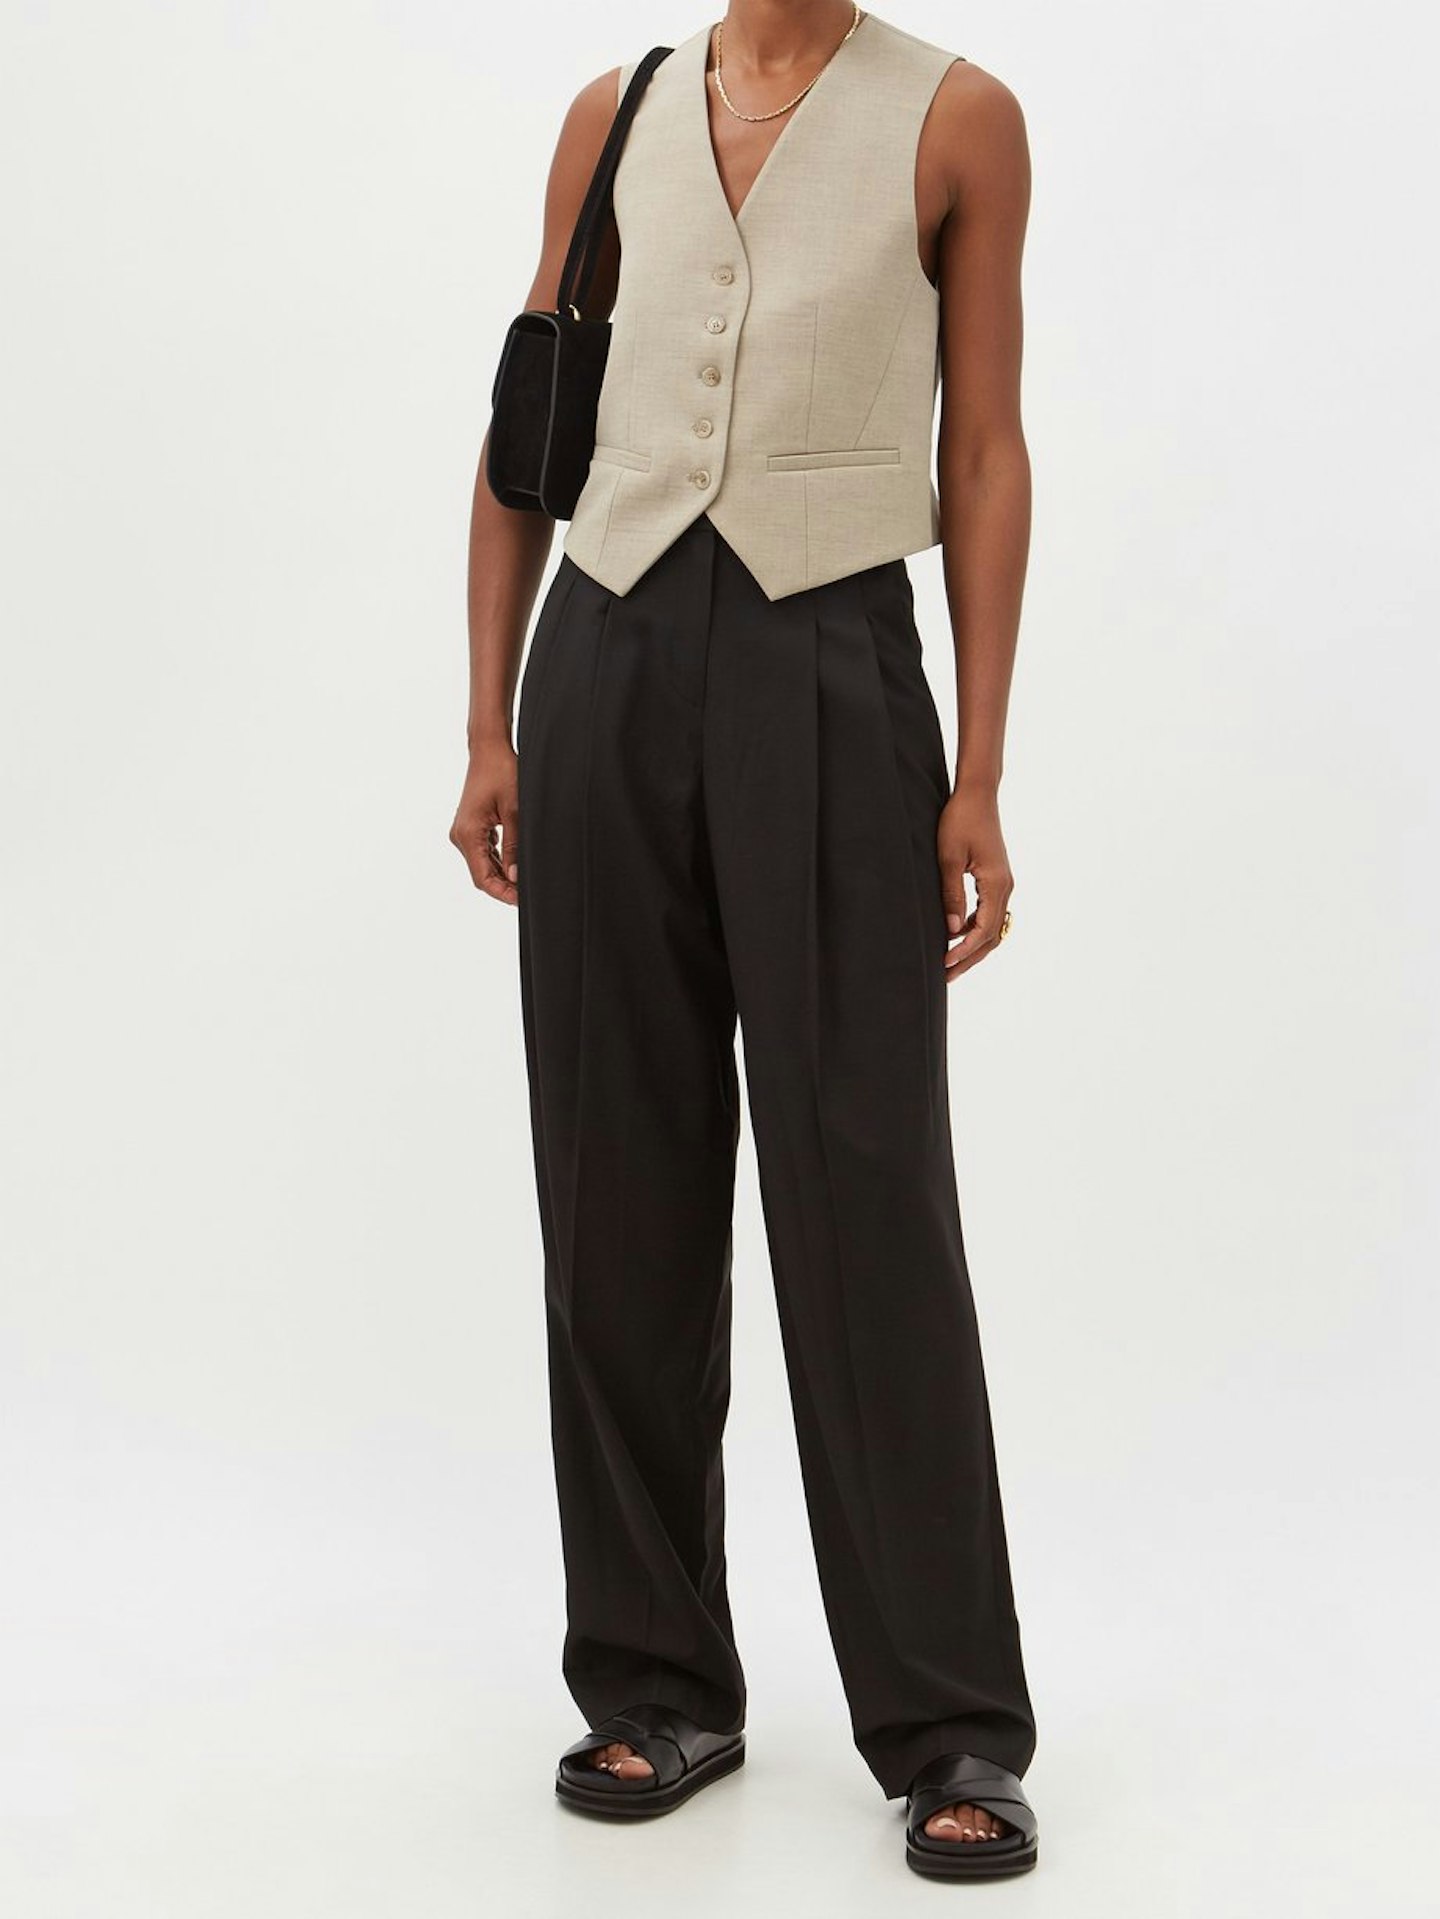 Why The Waistcoat Is Key To Your Summer Wardrobe | Fashion | Grazia